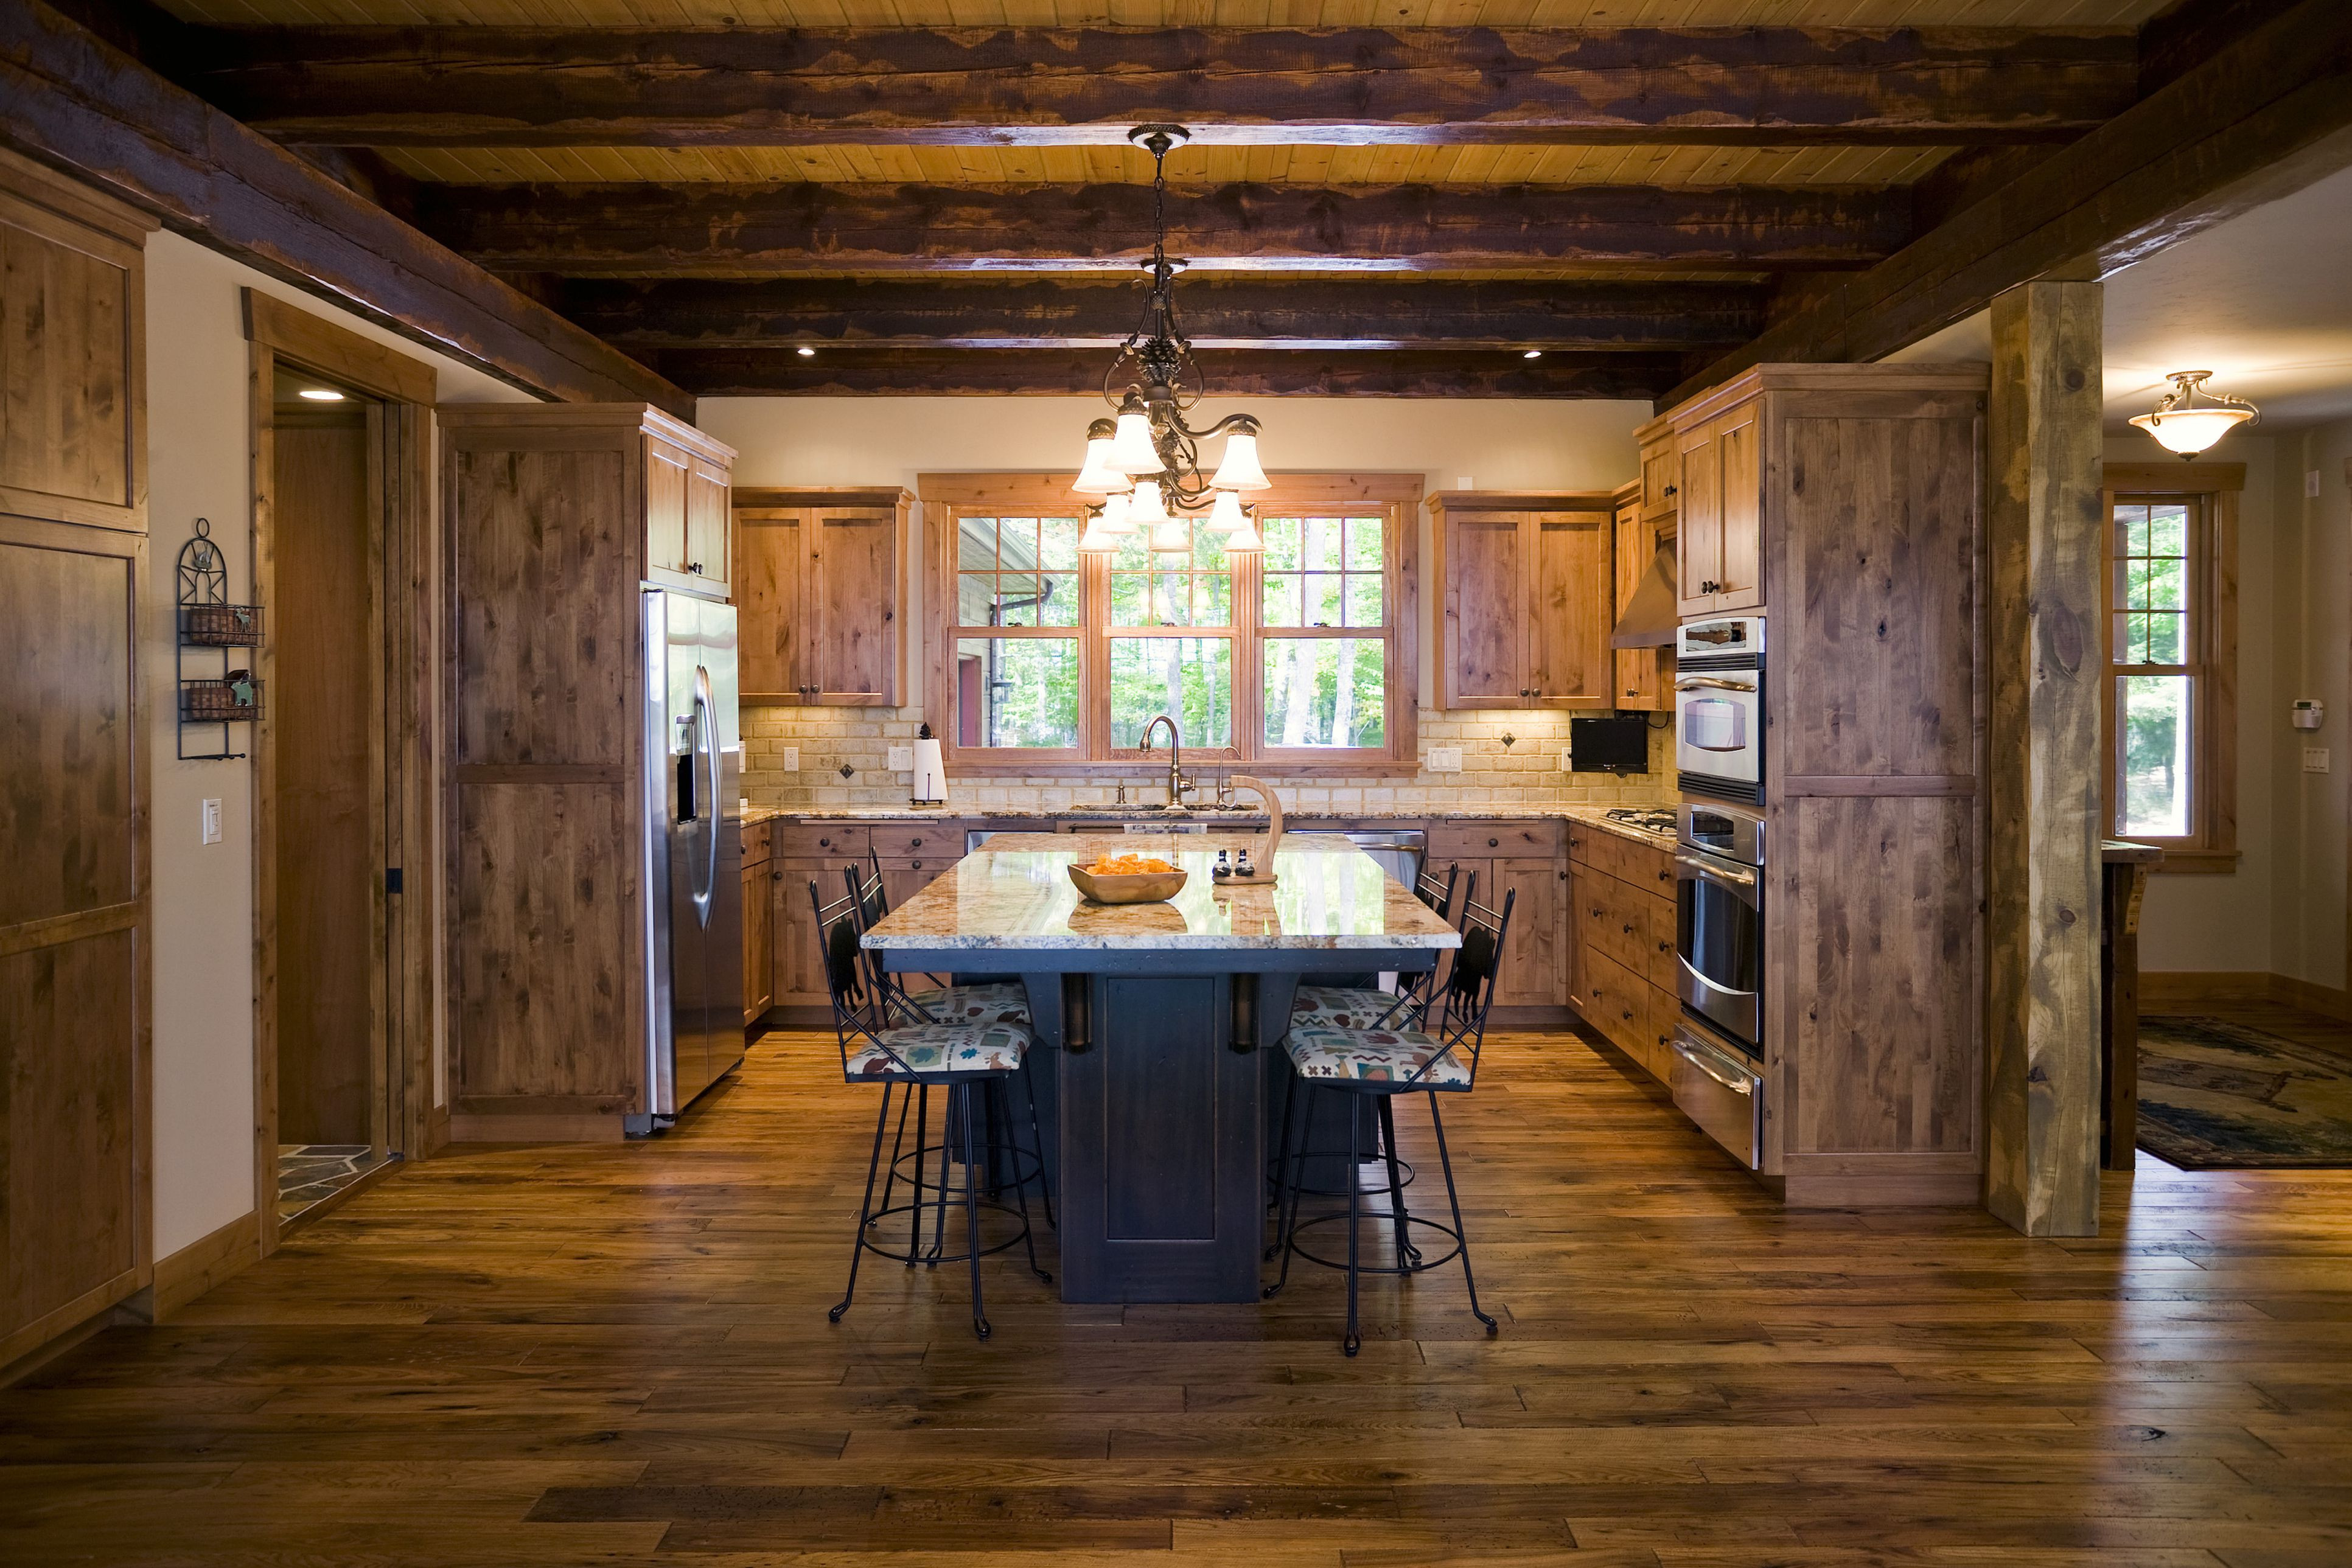 24 attractive Hardwood Floor Cleaning Buffalo Ny 2024 free download hardwood floor cleaning buffalo ny of country or rustic kitchen design ideas regarding kitchen with wood floor and open wood beam ceiling 88801427 image studios 56a4a1615f9b58b7d0d7e63f